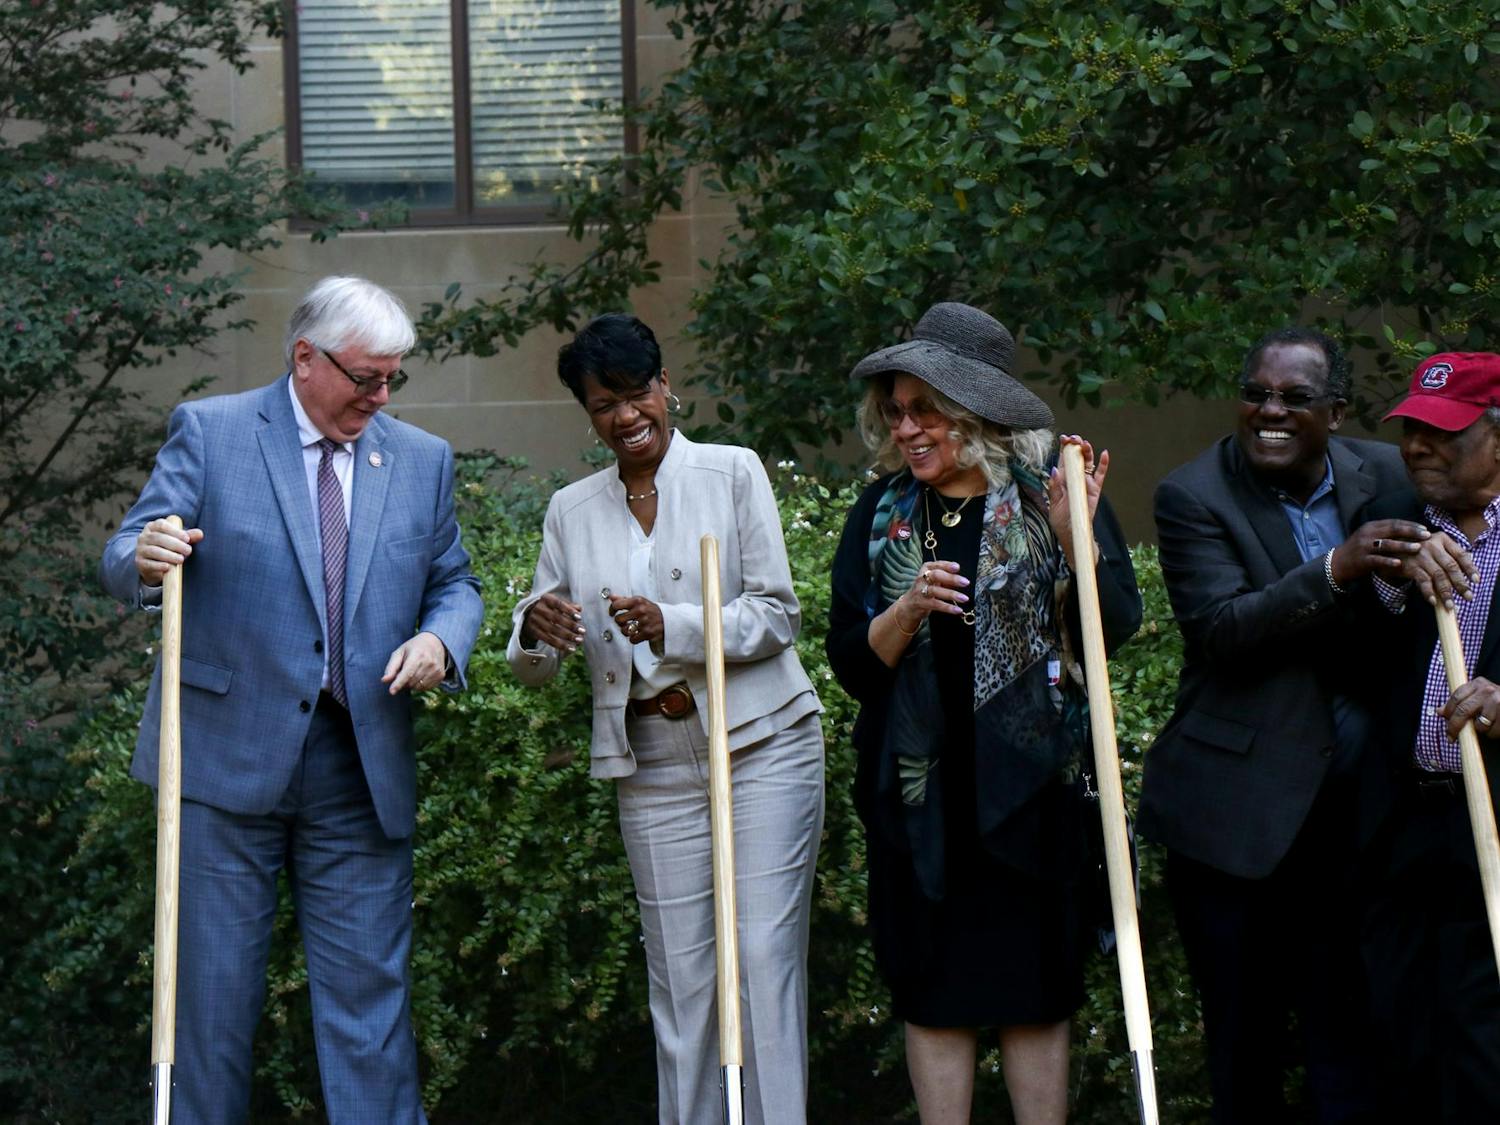 USC President Michael Amiridis (left), Cindy Baumgardener (center) and Henrie Monteith Treadwell (right) smile while breaking ground where a monument will be placed in 2024 to honor the first three Black students to graduate from USC. A sign showing Treadwell, Anderson and Solomon Jr. now stands outside of McKissick Museum.